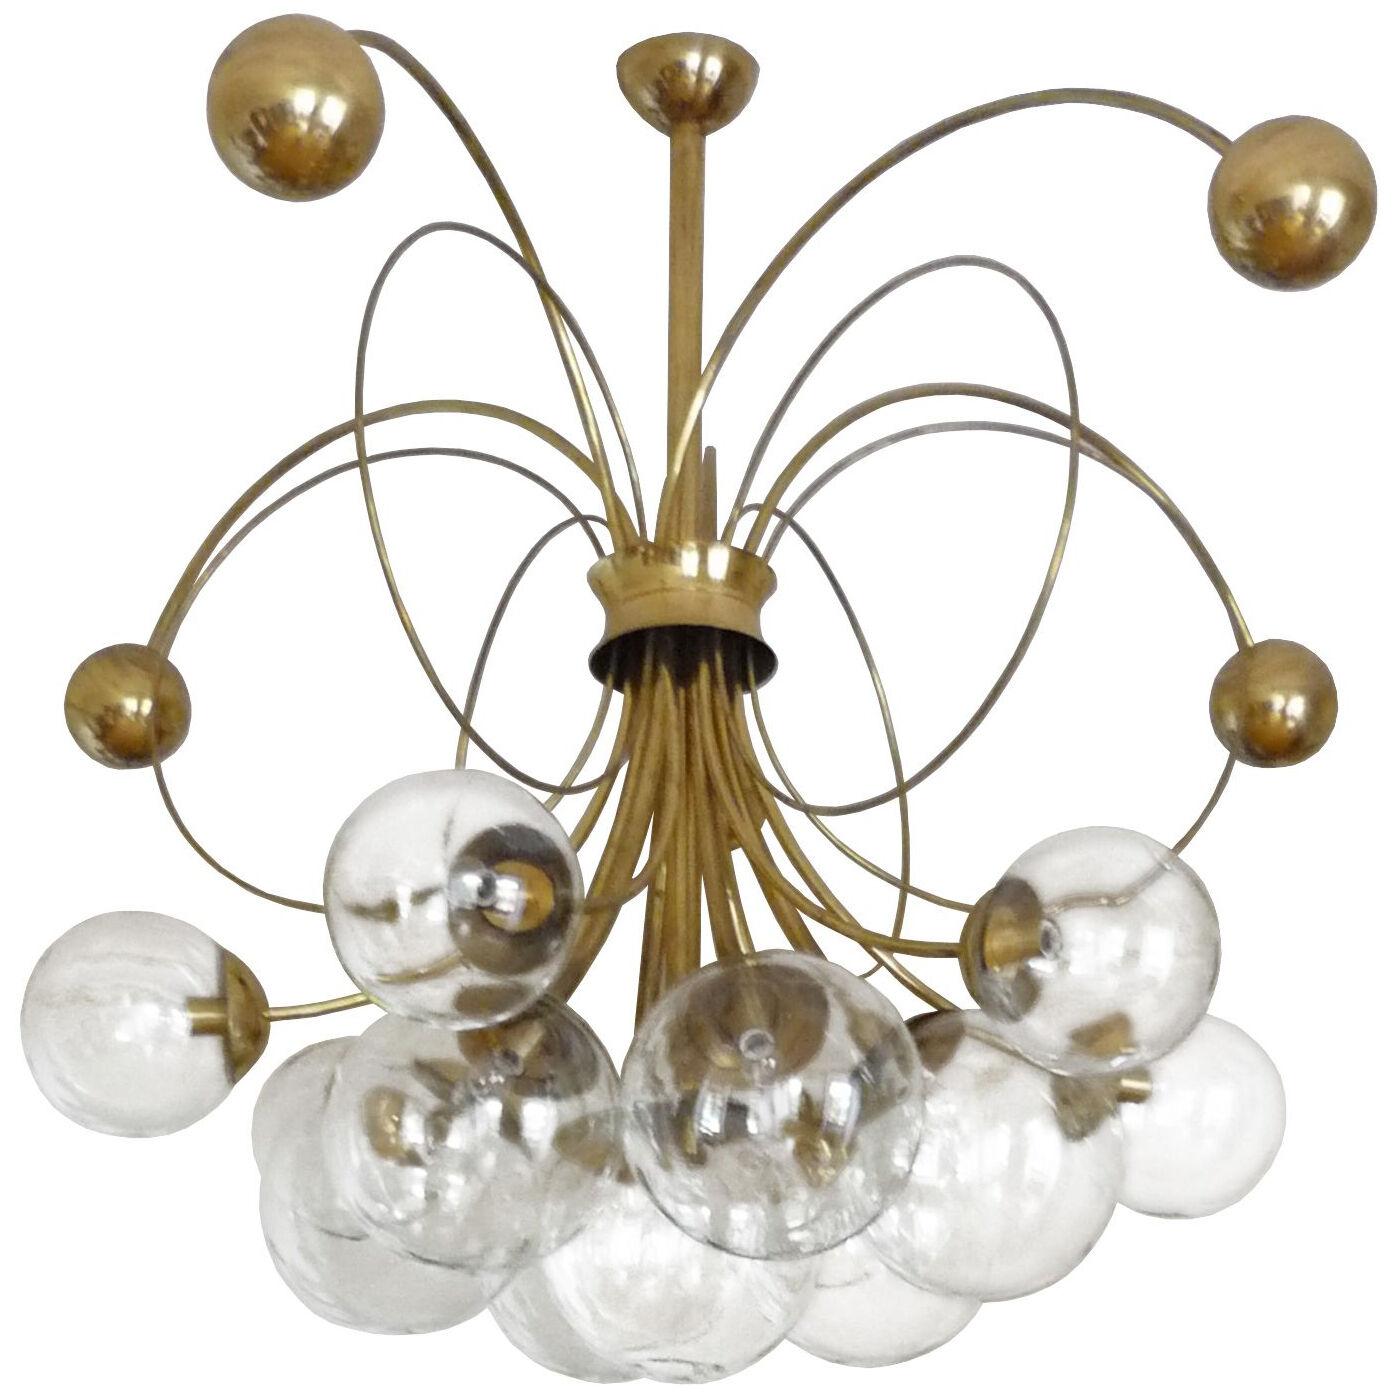 German Brass Chandelier with Circular Brass Rings and Glass Globes